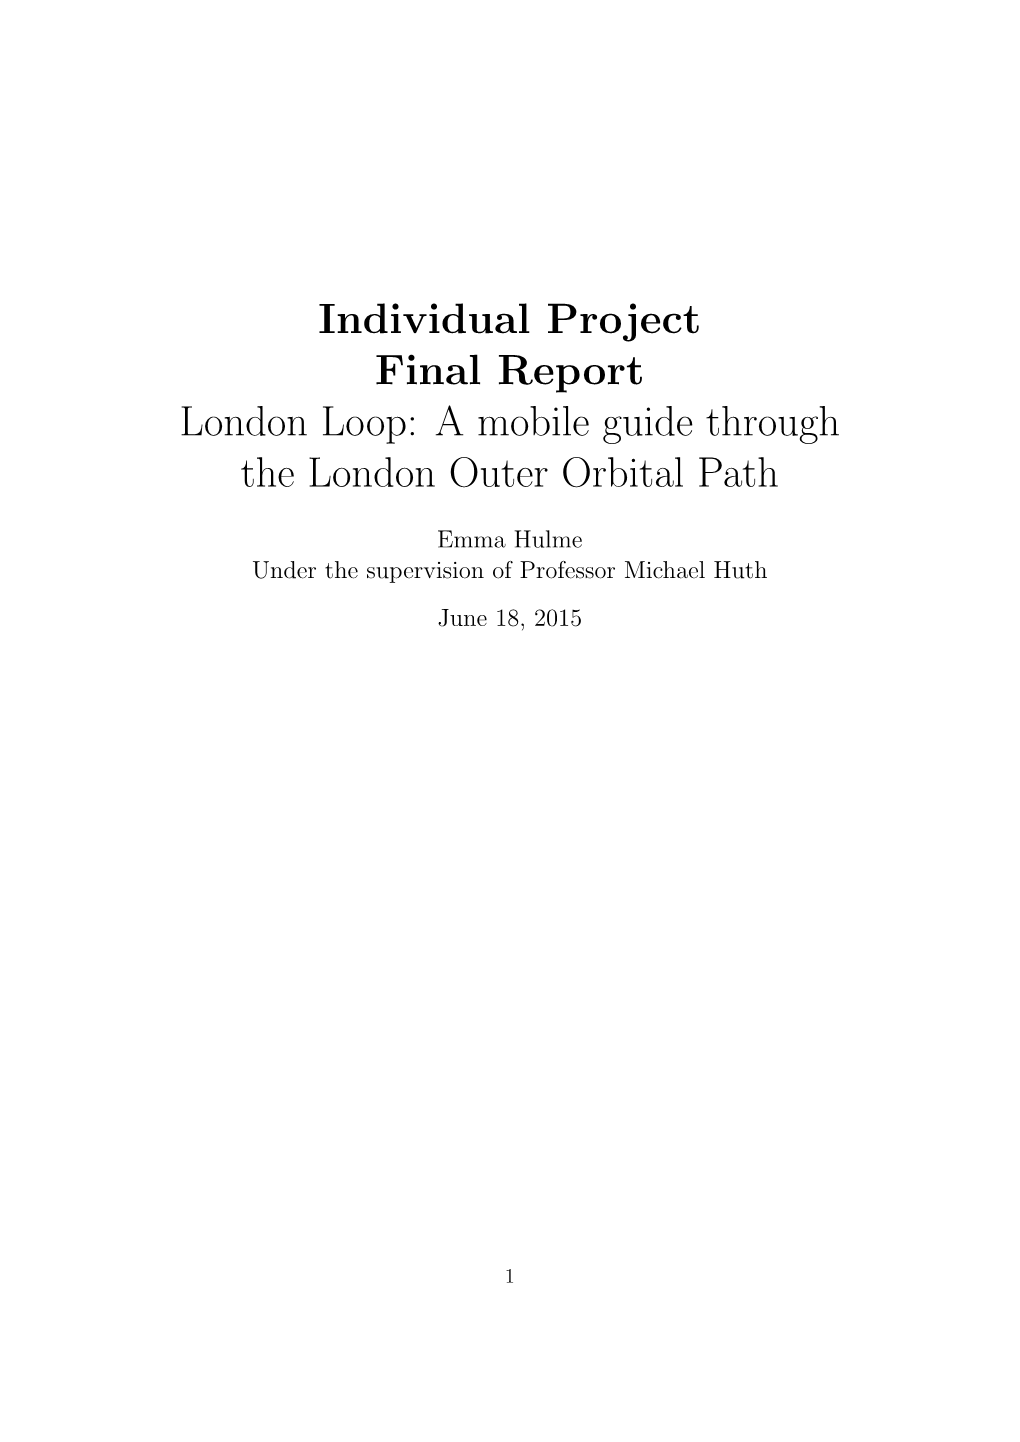 Individual Project Final Report London Loop: a Mobile Guide Through the London Outer Orbital Path